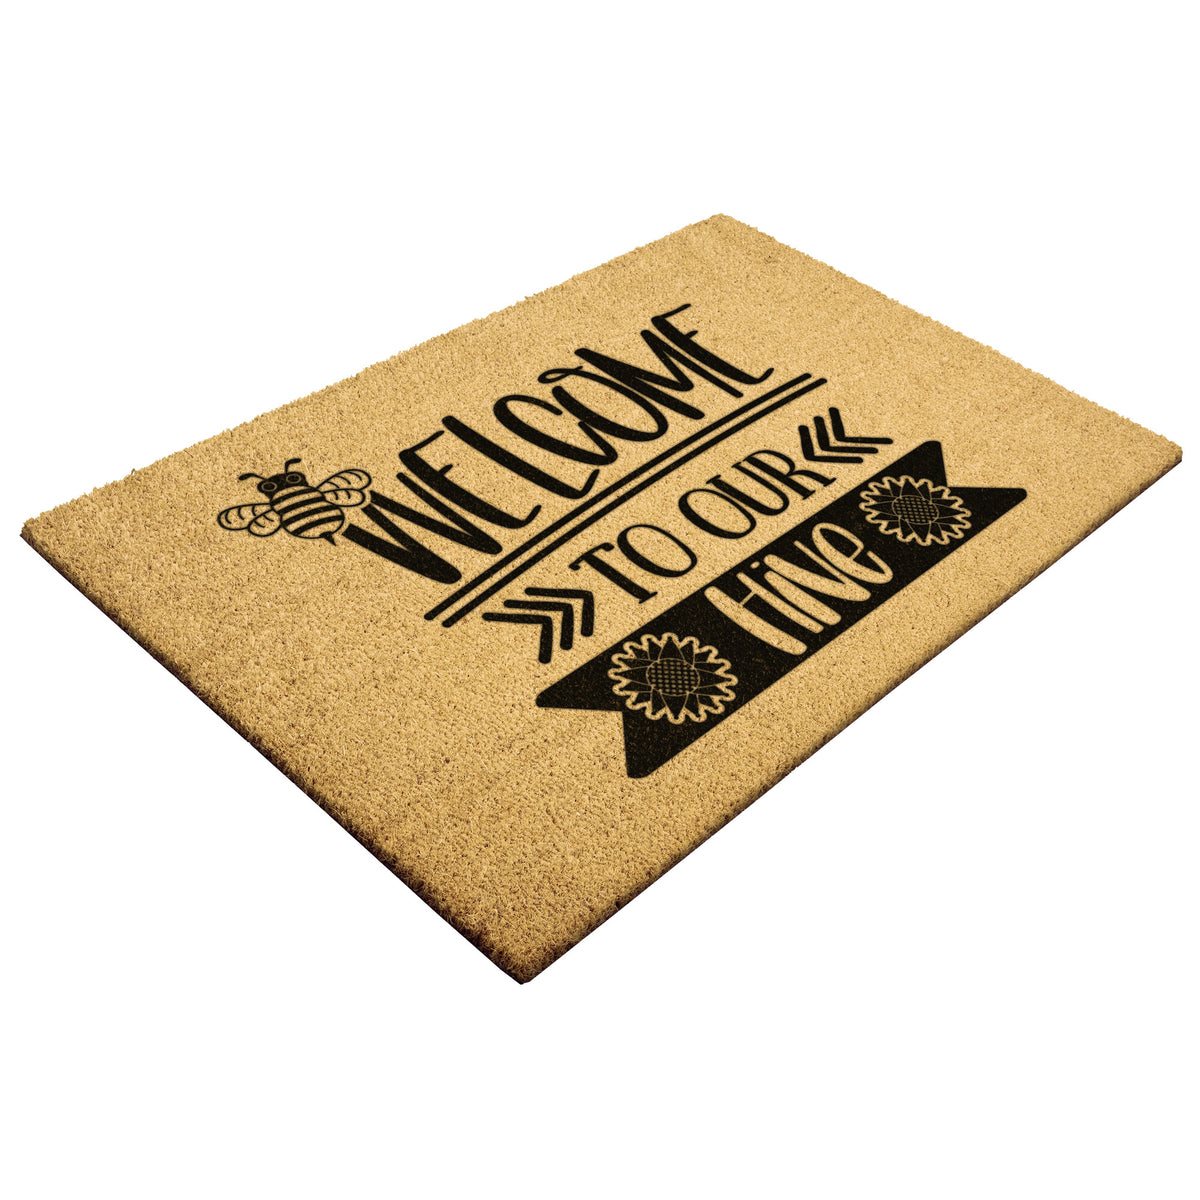 Welcome to Our Hive Doormat